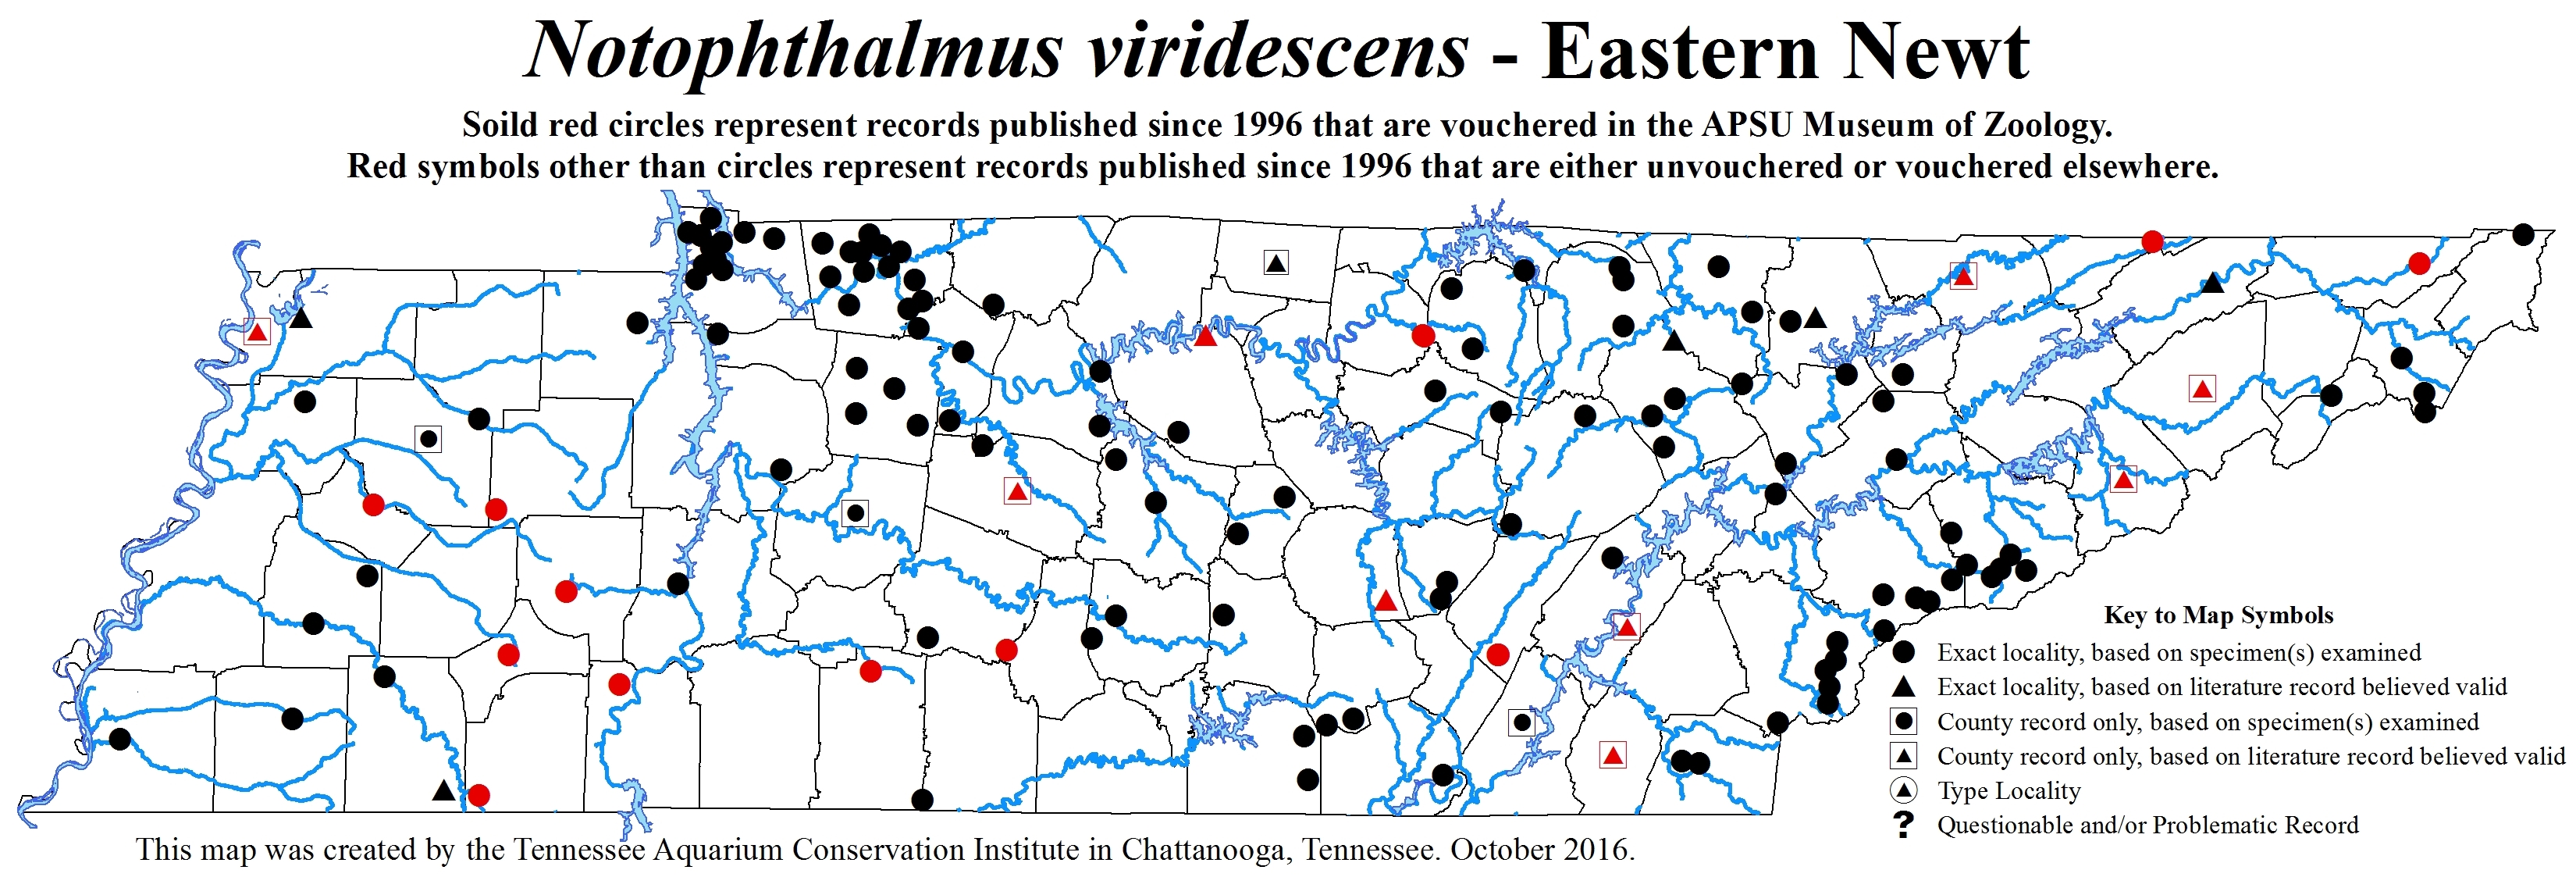 New Distribution Map - Notophthalmus viridescens (Rafinesque) - Eastern Newt